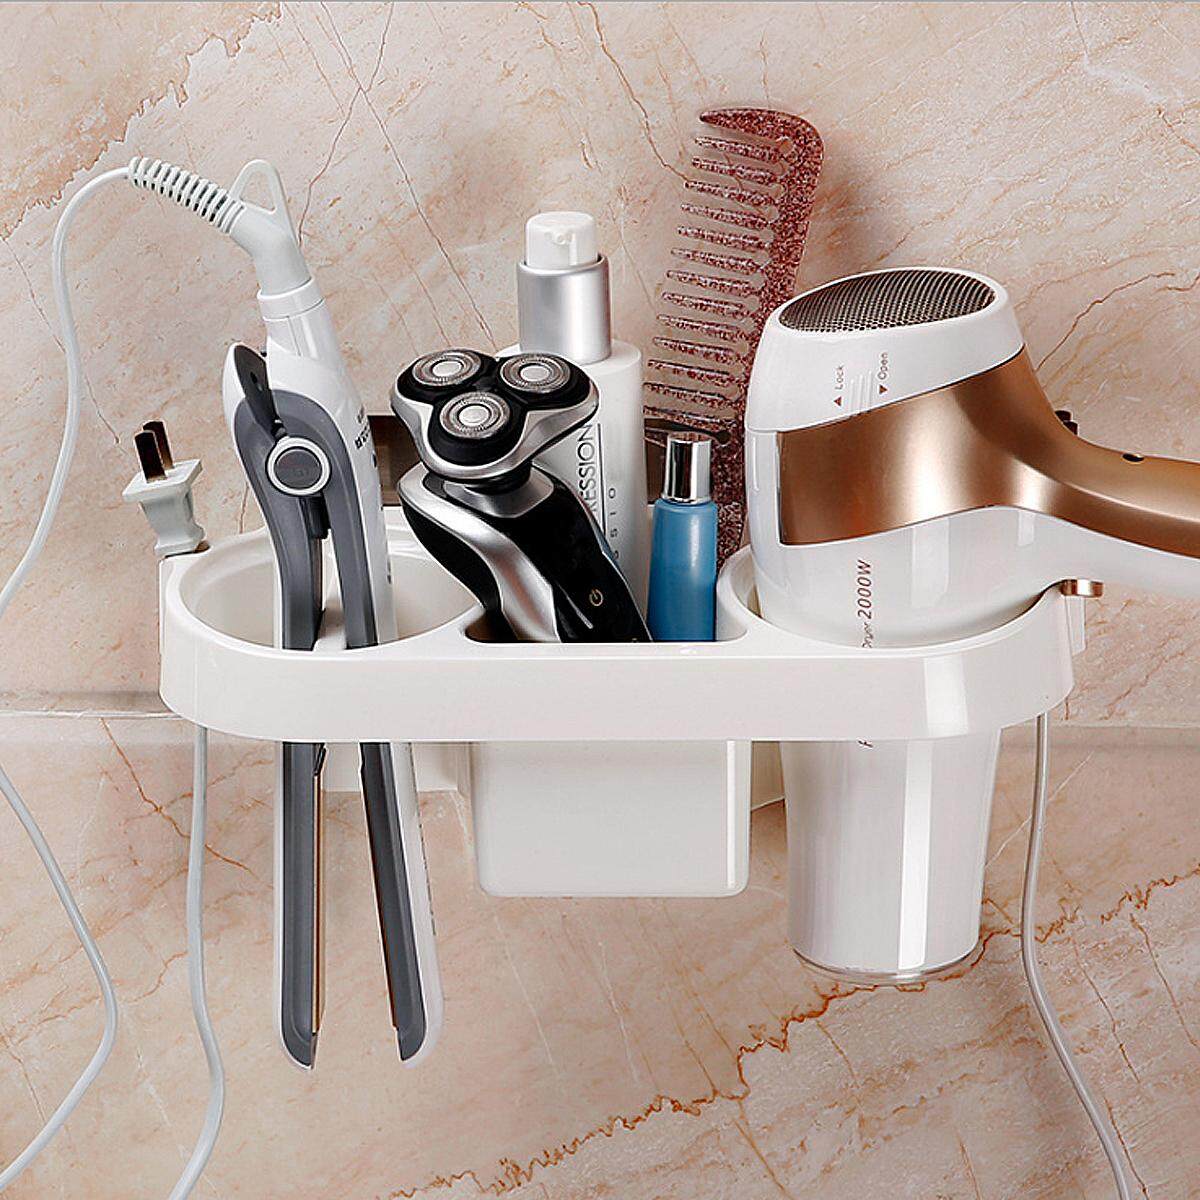 Removeable Double Hole Hair Dryer Storage Comb Organizer Wall Mounted Bathroom White - intl